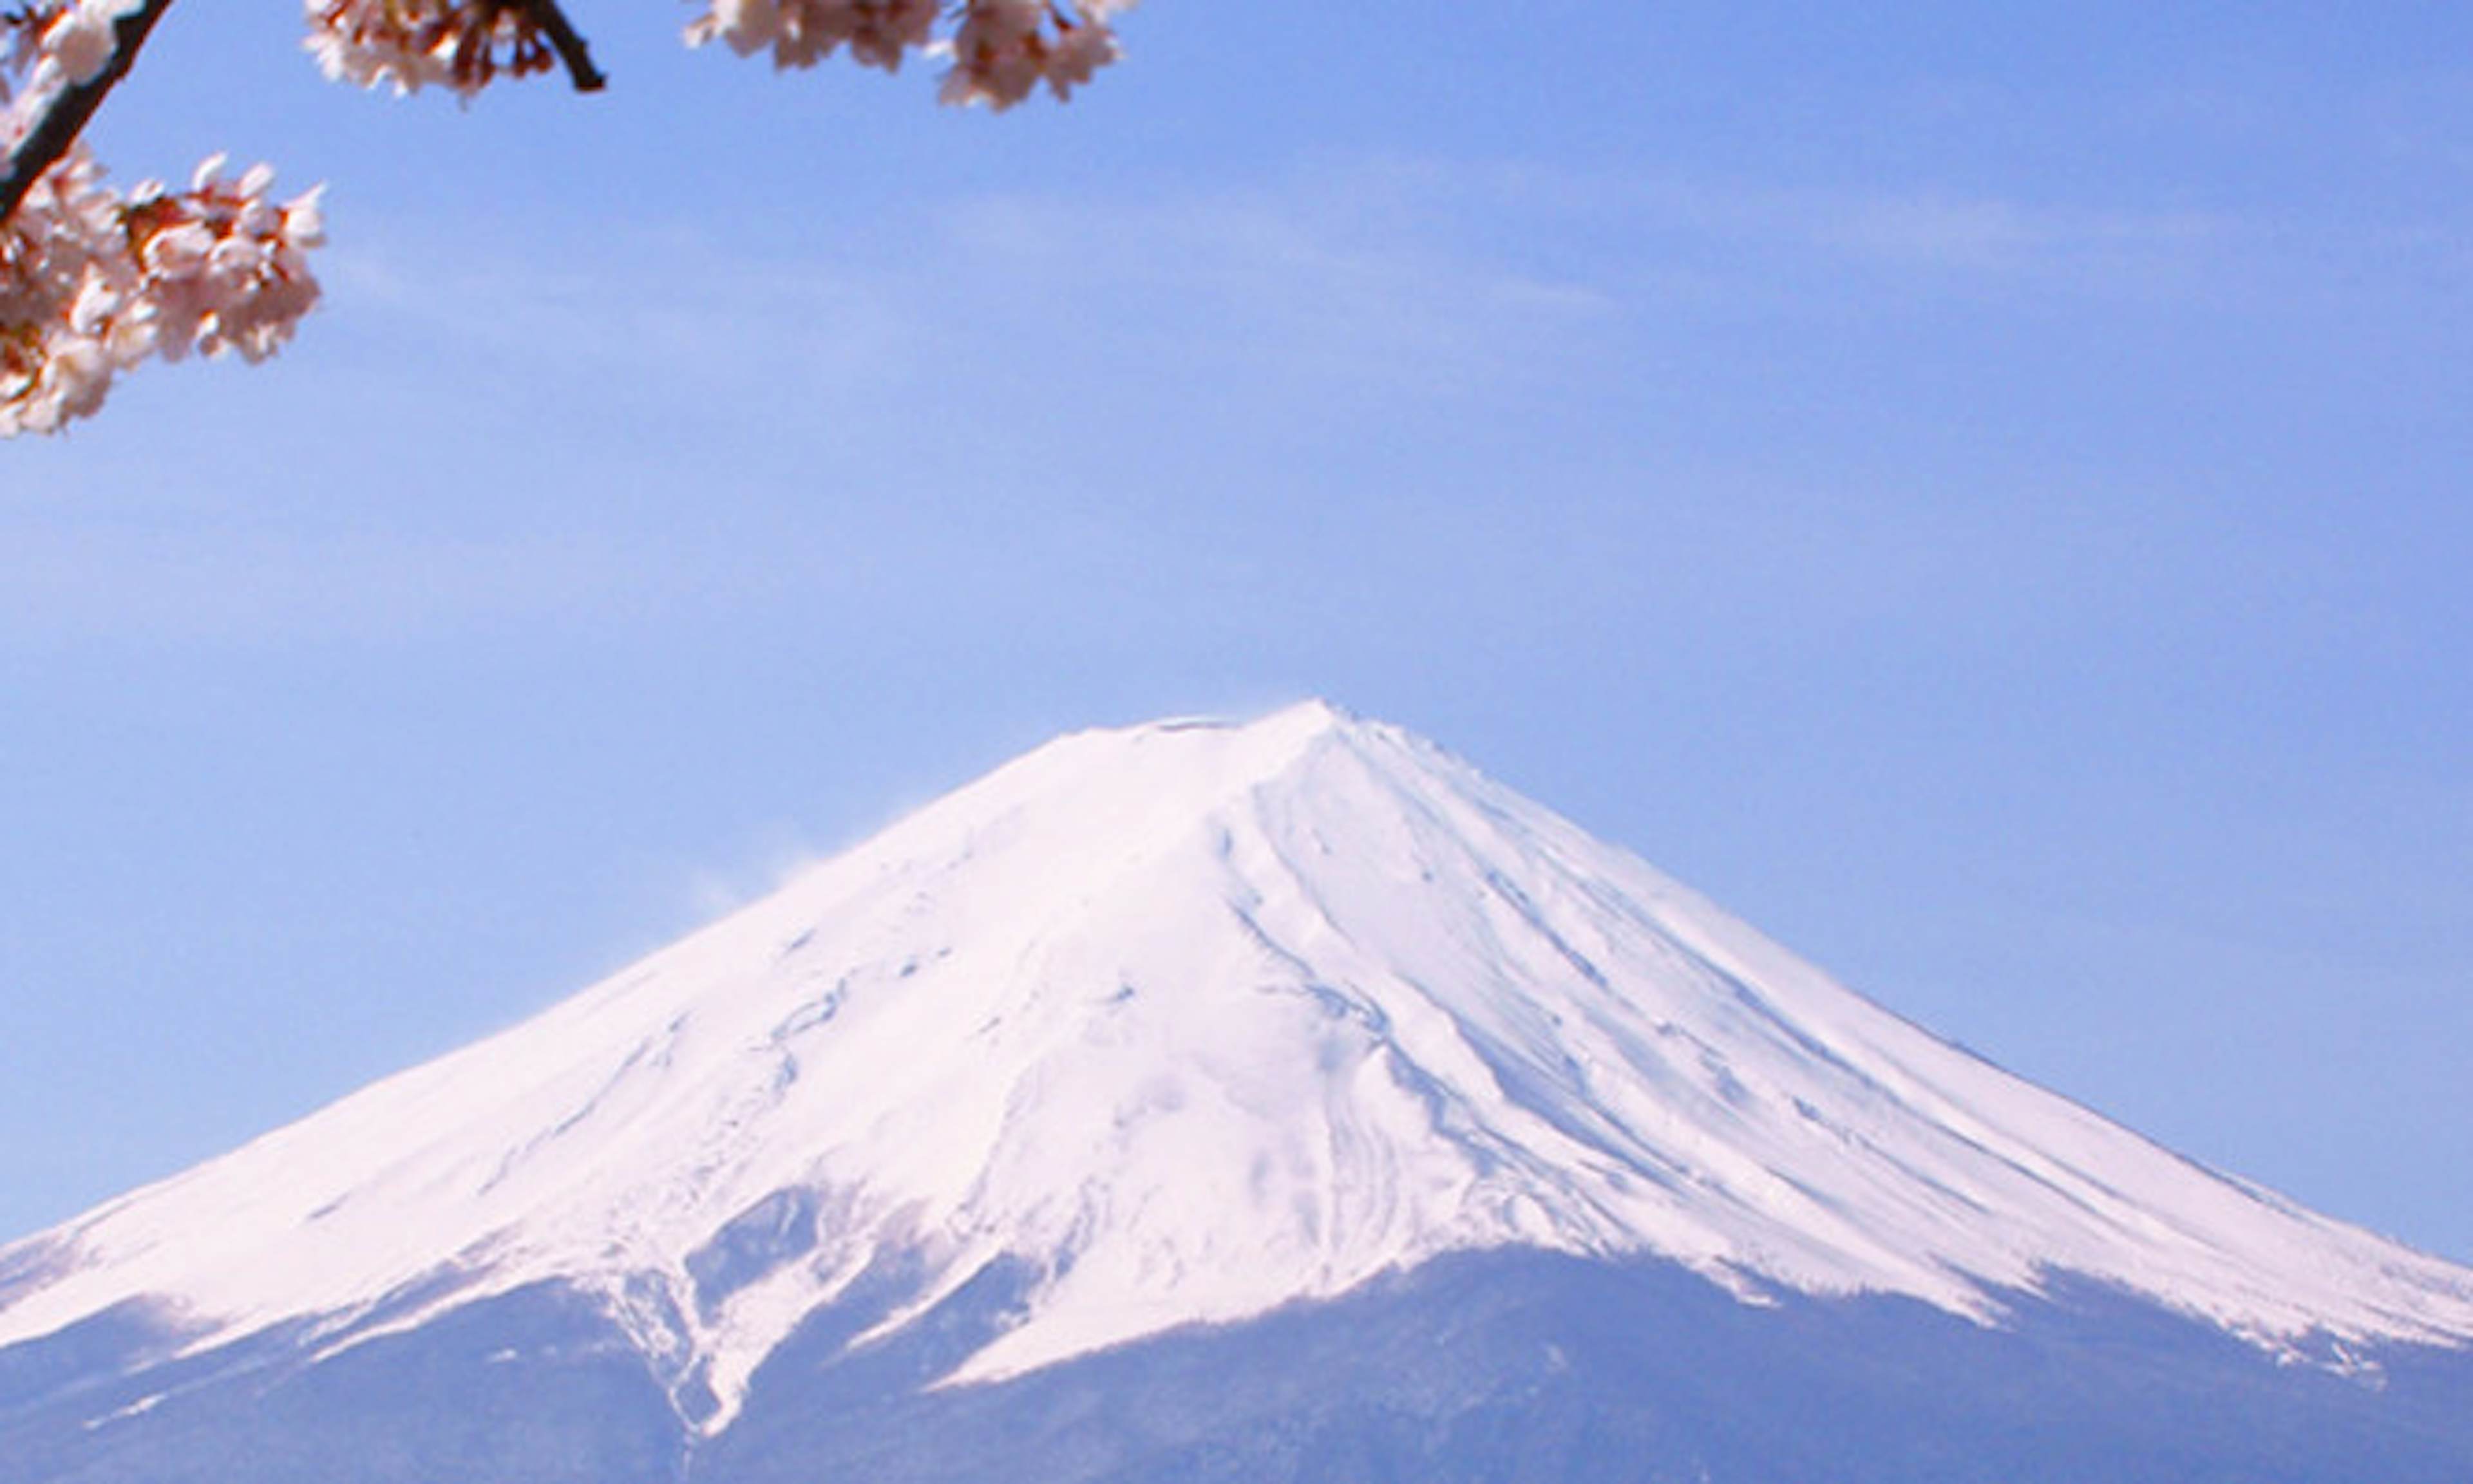 white snow cap on mount fuji with cherry blossom branches